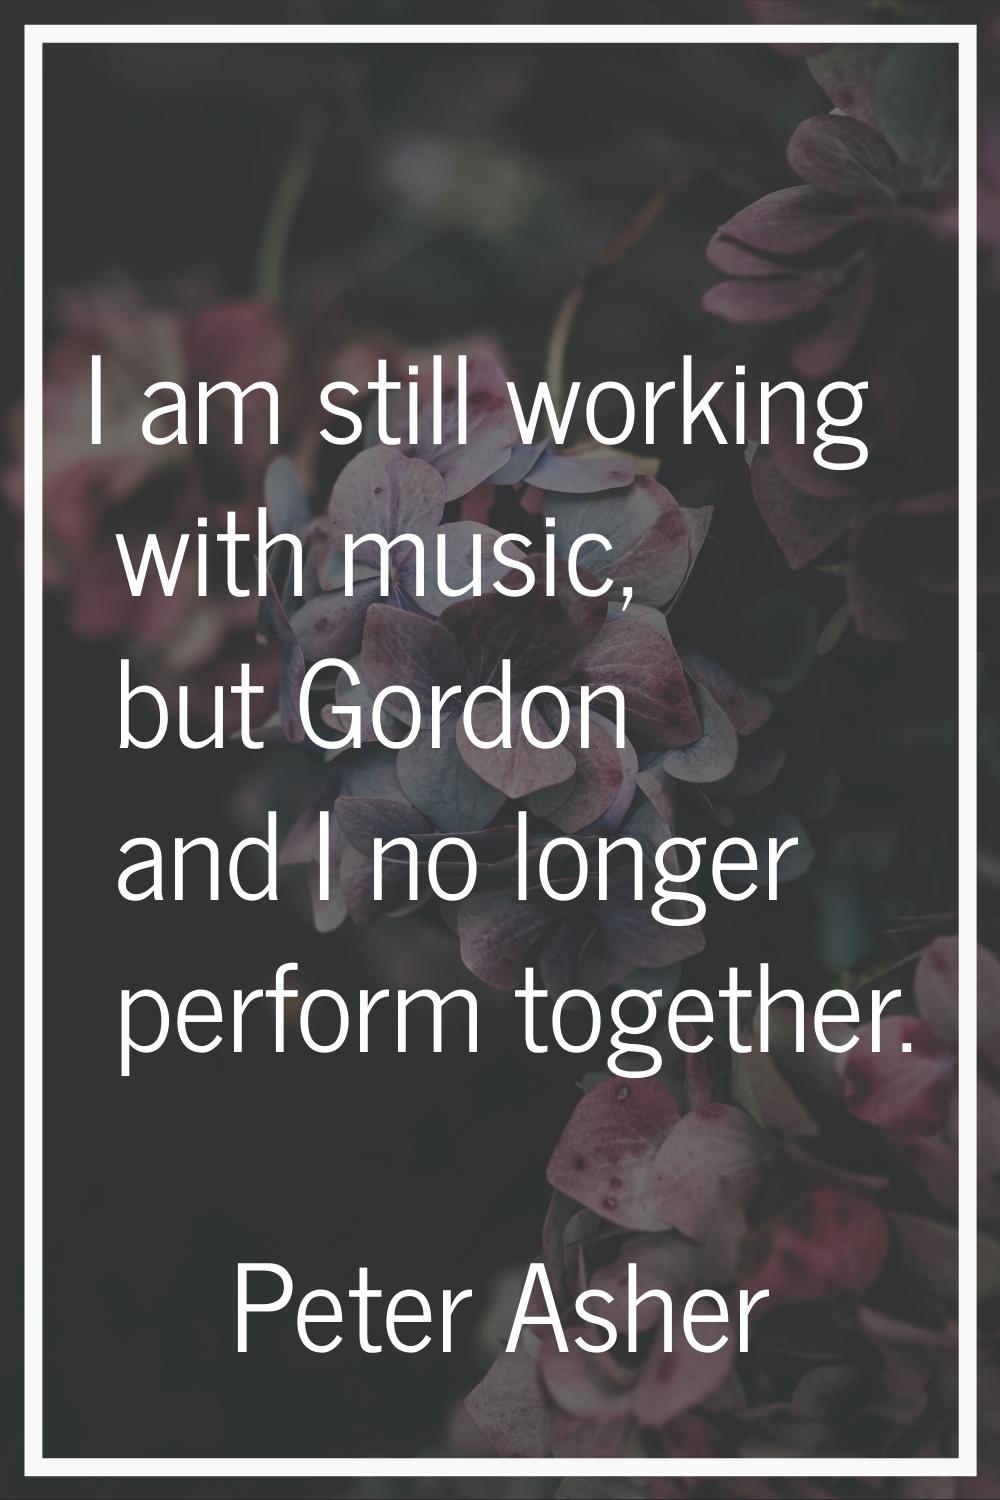 I am still working with music, but Gordon and I no longer perform together.